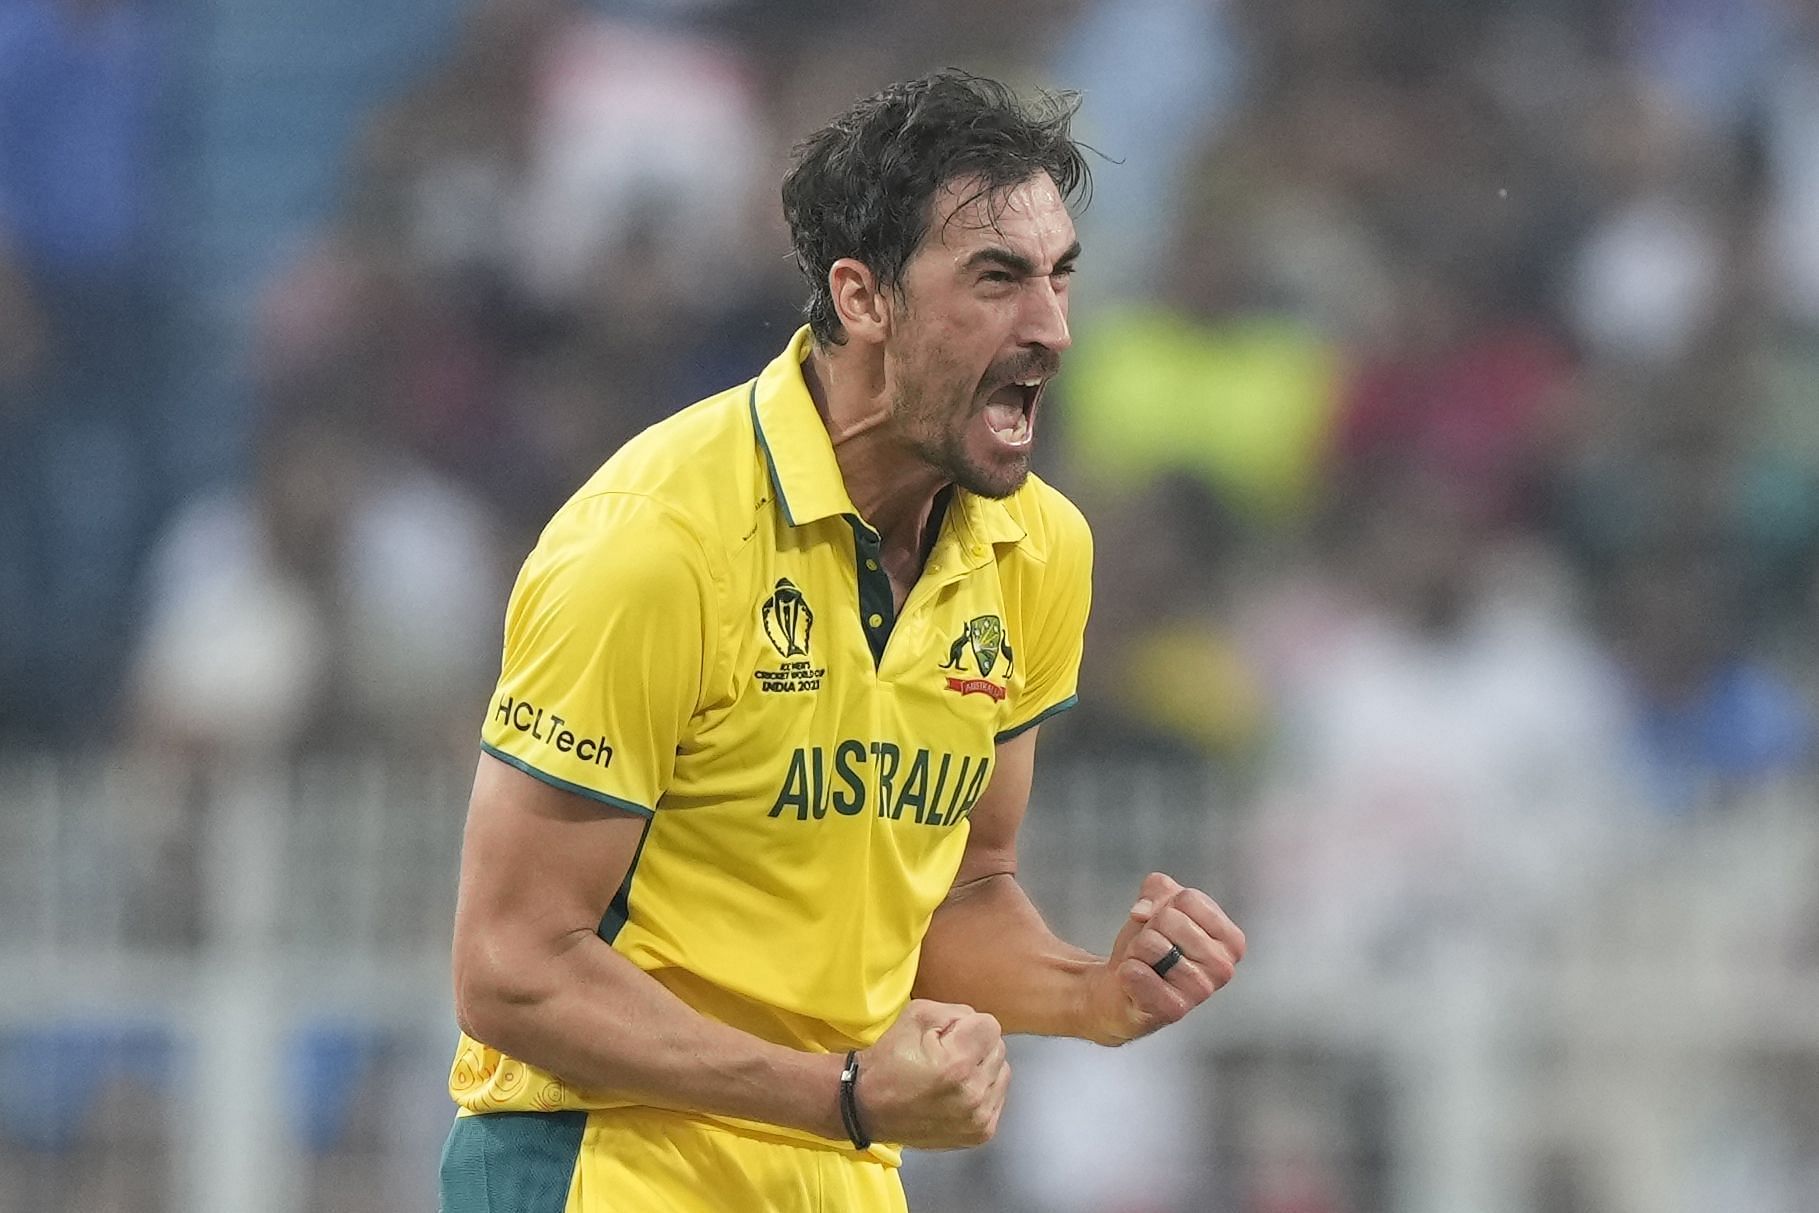 Mitchell Starc bowled an extended seven-over spell with the new ball